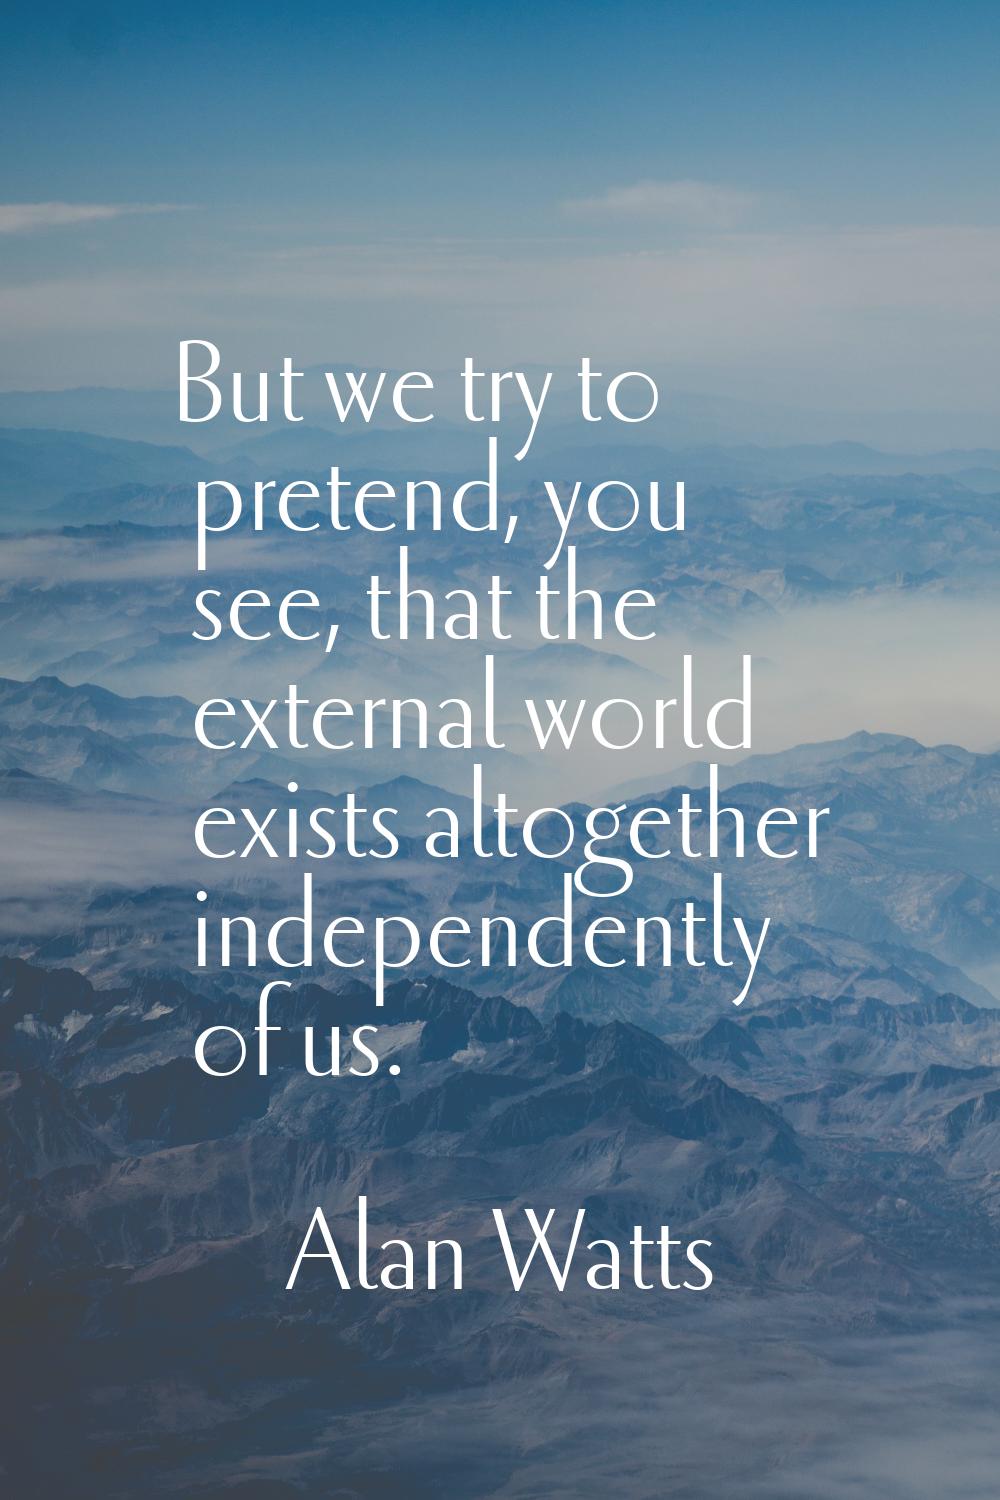 But we try to pretend, you see, that the external world exists altogether independently of us.